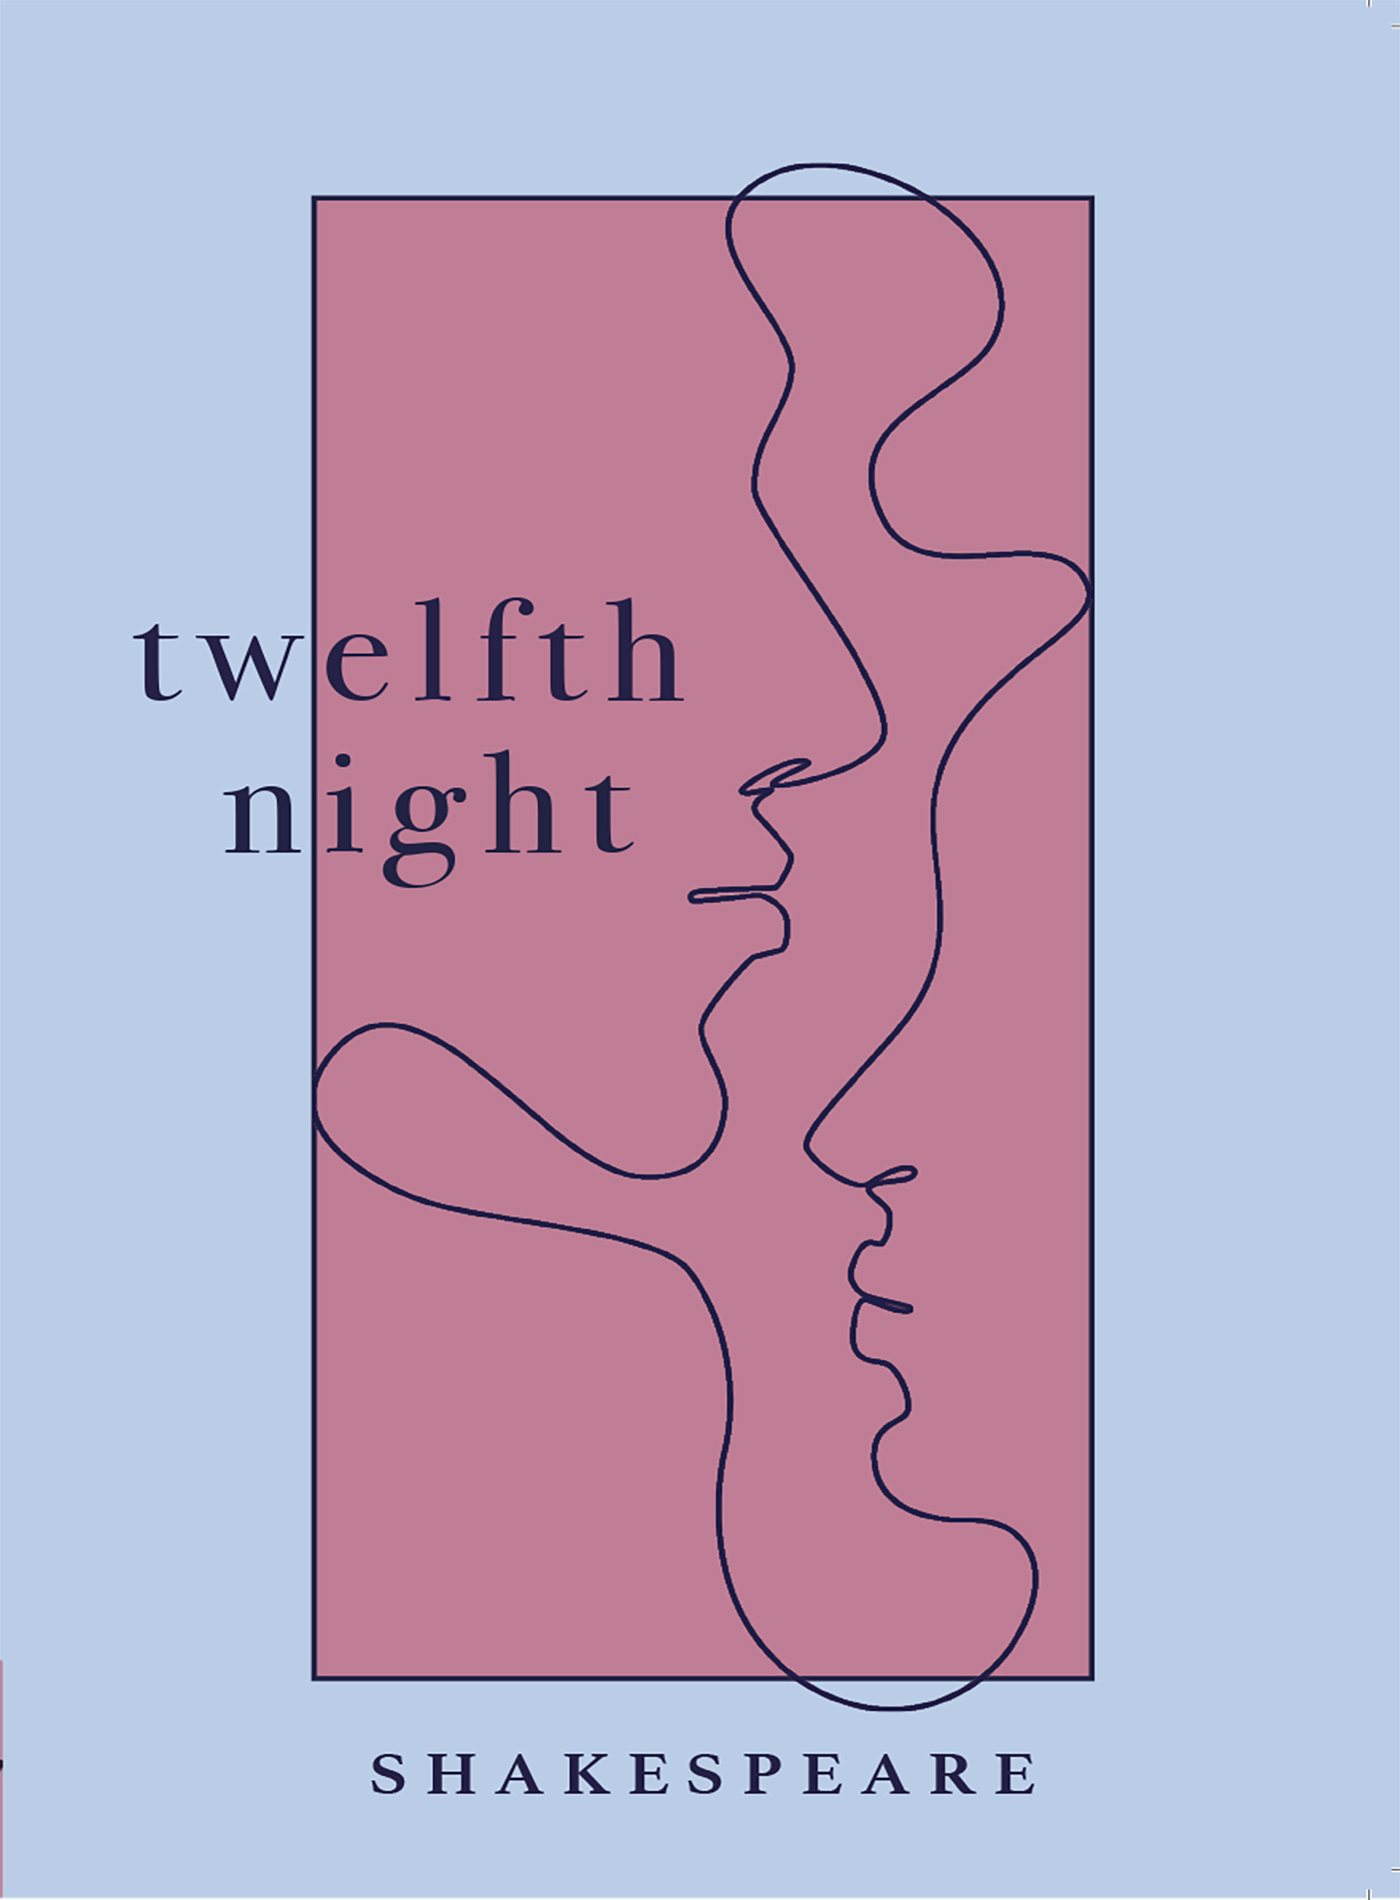 a line drawing of a male and female profile facing each other in a pink box bordered by a blue box